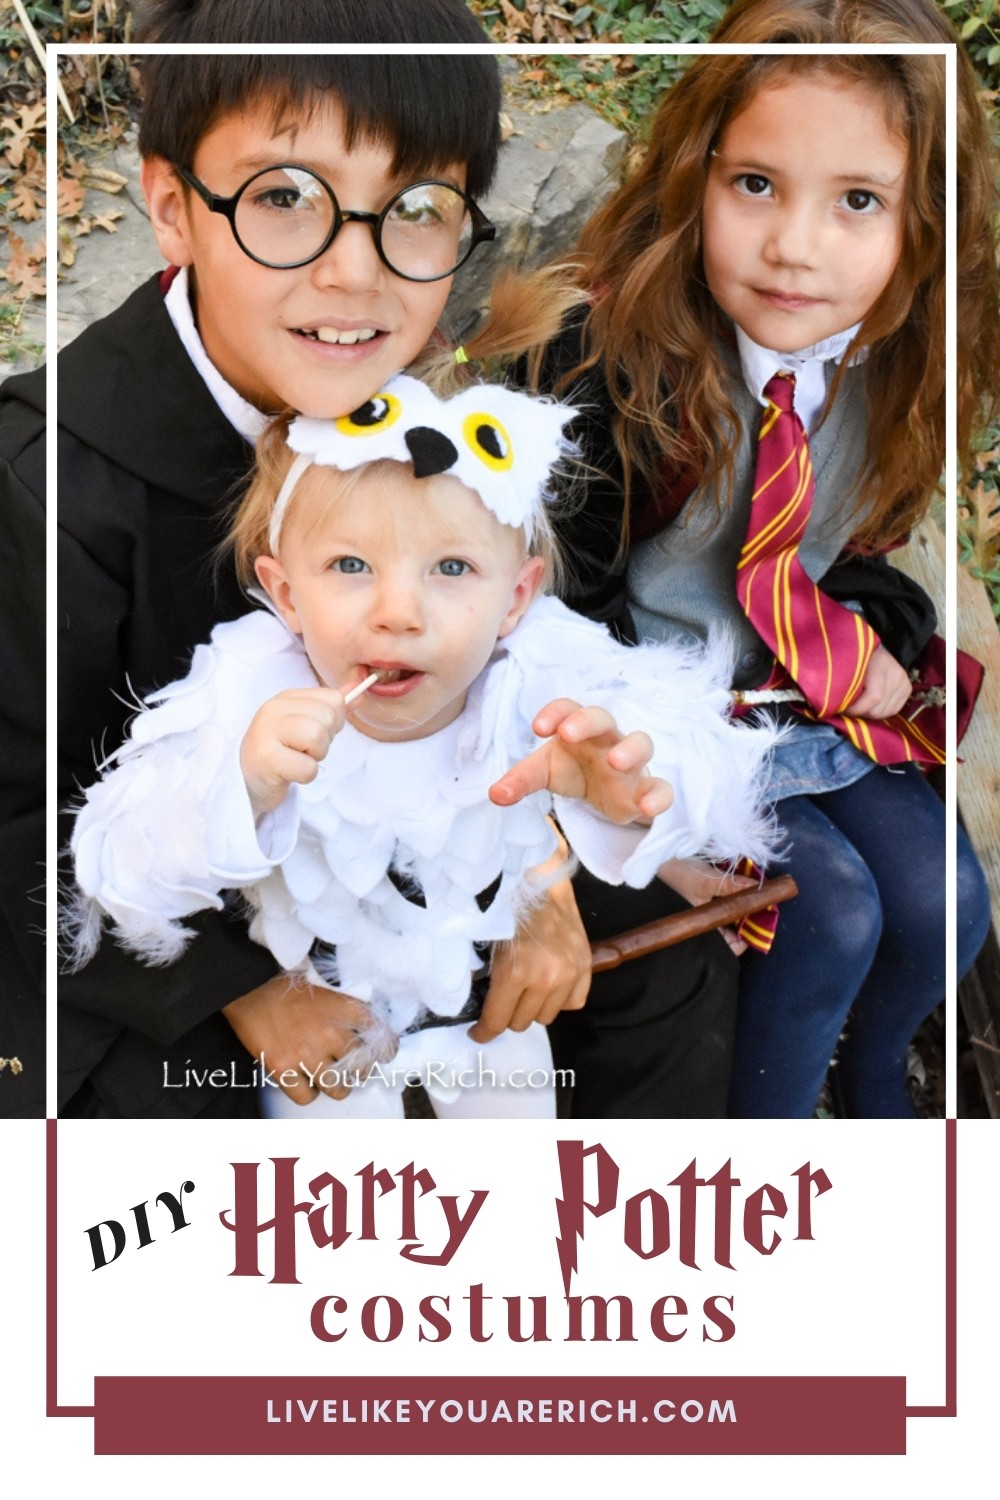 This Halloween my kids wanted to dress up in Harry Potter. At first, we were going to have Amelia (1 years old) be a Mandrake, but we eventually decided that Hedwig the Owl would be a better fit. It was a fun Halloween and the kids loved casting spells and pretending to be the characters they were dressed up as. #halloweencostume #harrypotter